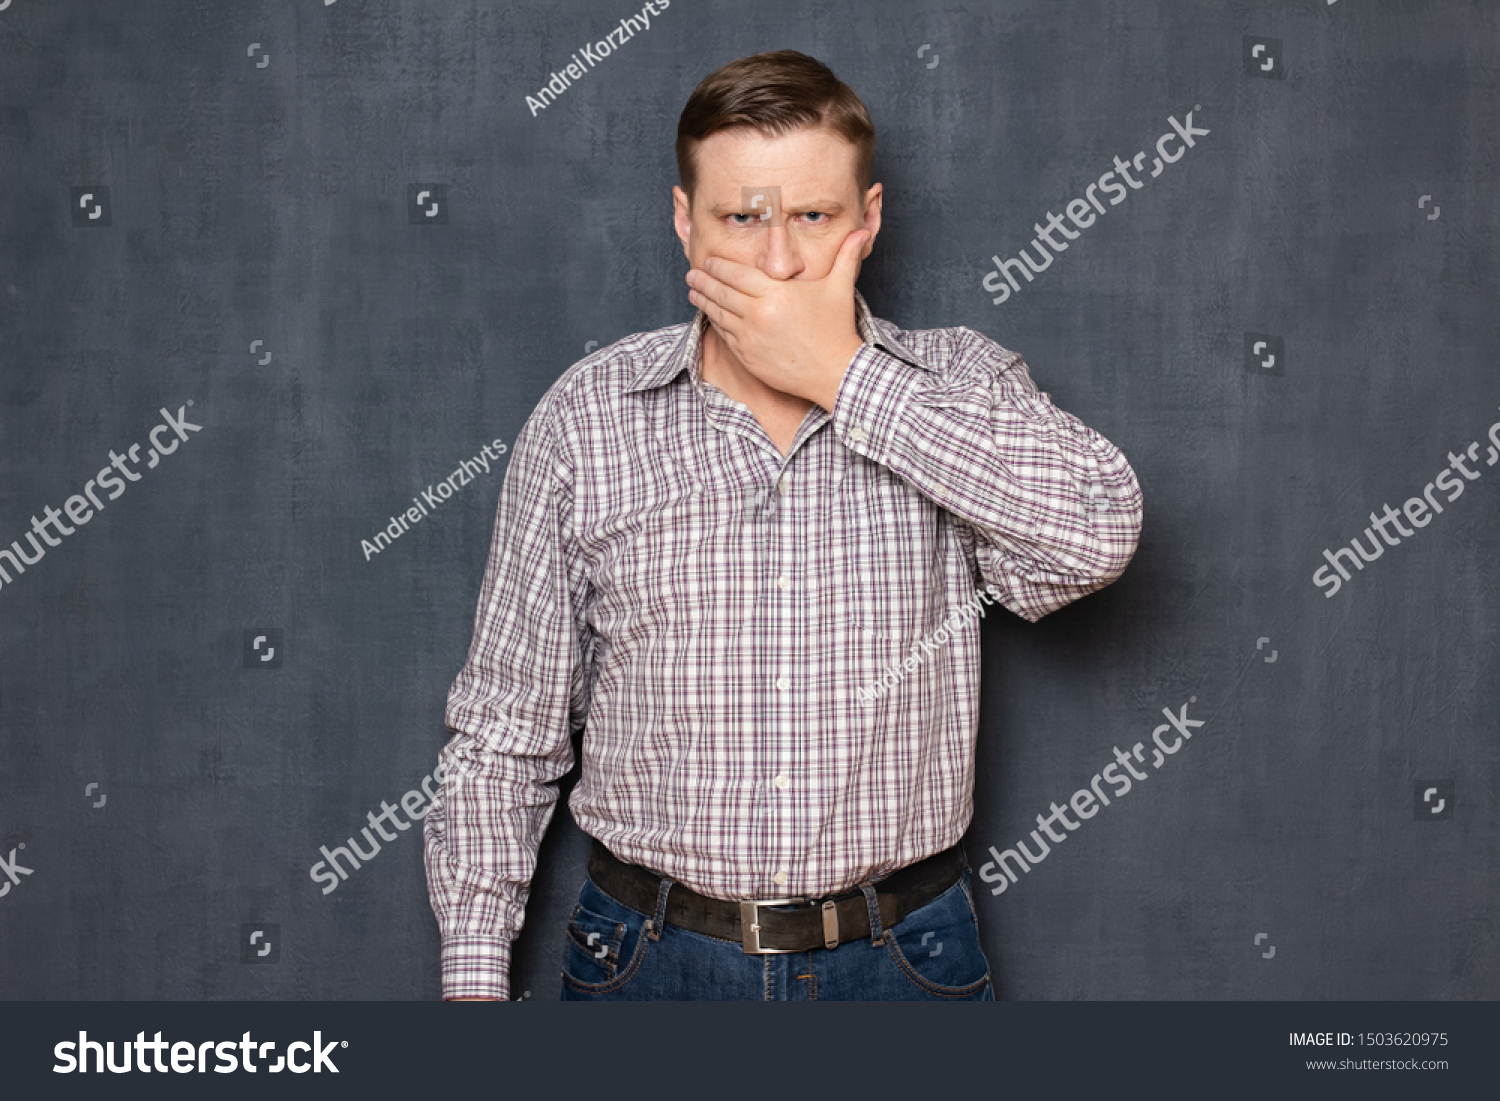 Studio half-length portrait of angry man wearing checkered shirt, covering mouth with hand like not wanting to say something, over gray background. Concept of deliberate silence and reticence #1503620975